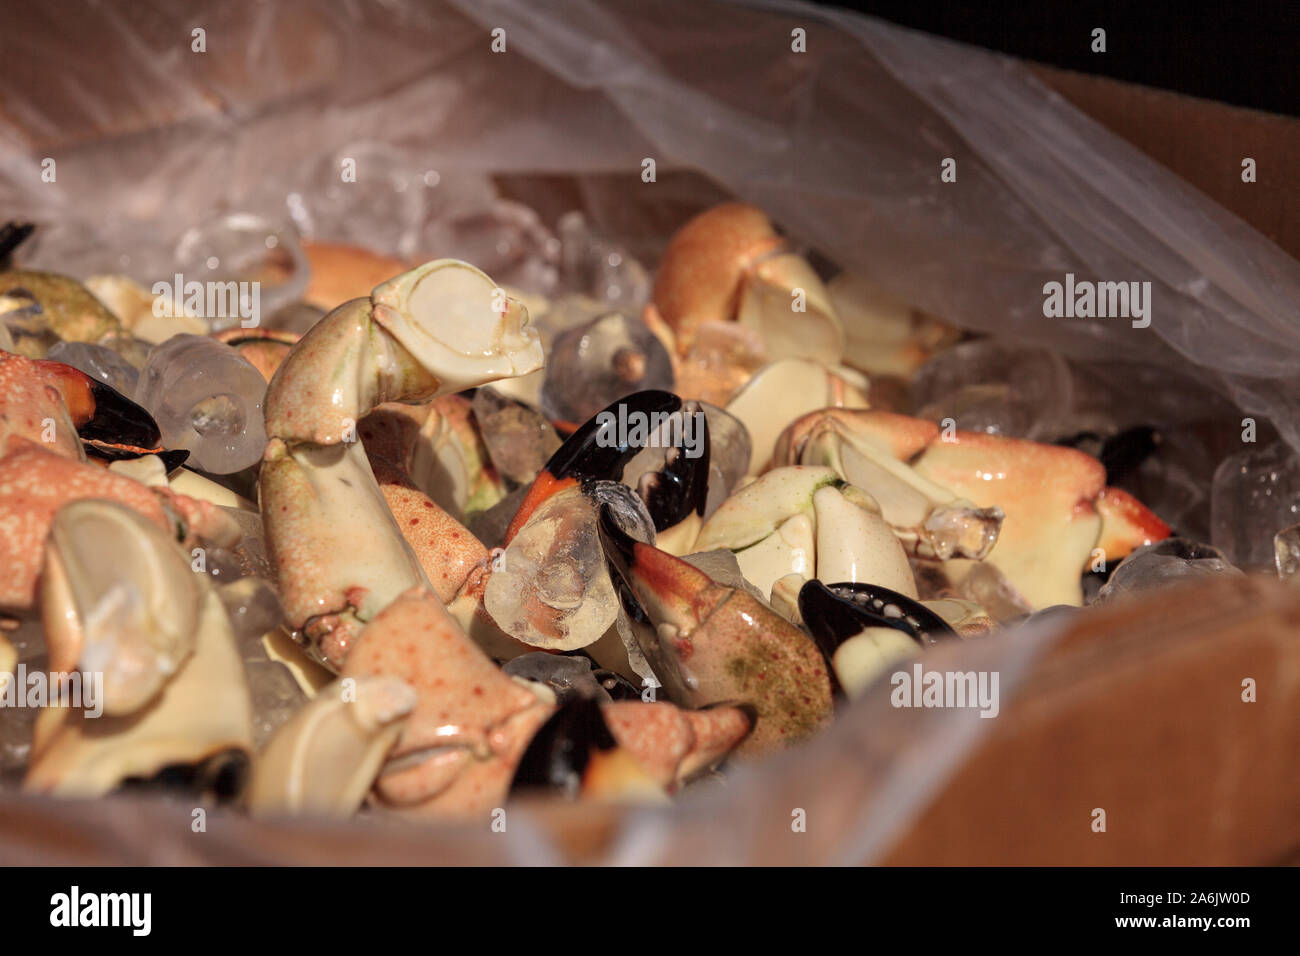 Florida Stone crab Menippe mercenaria steam cooked for lunch at a picnic festival. Stock Photo